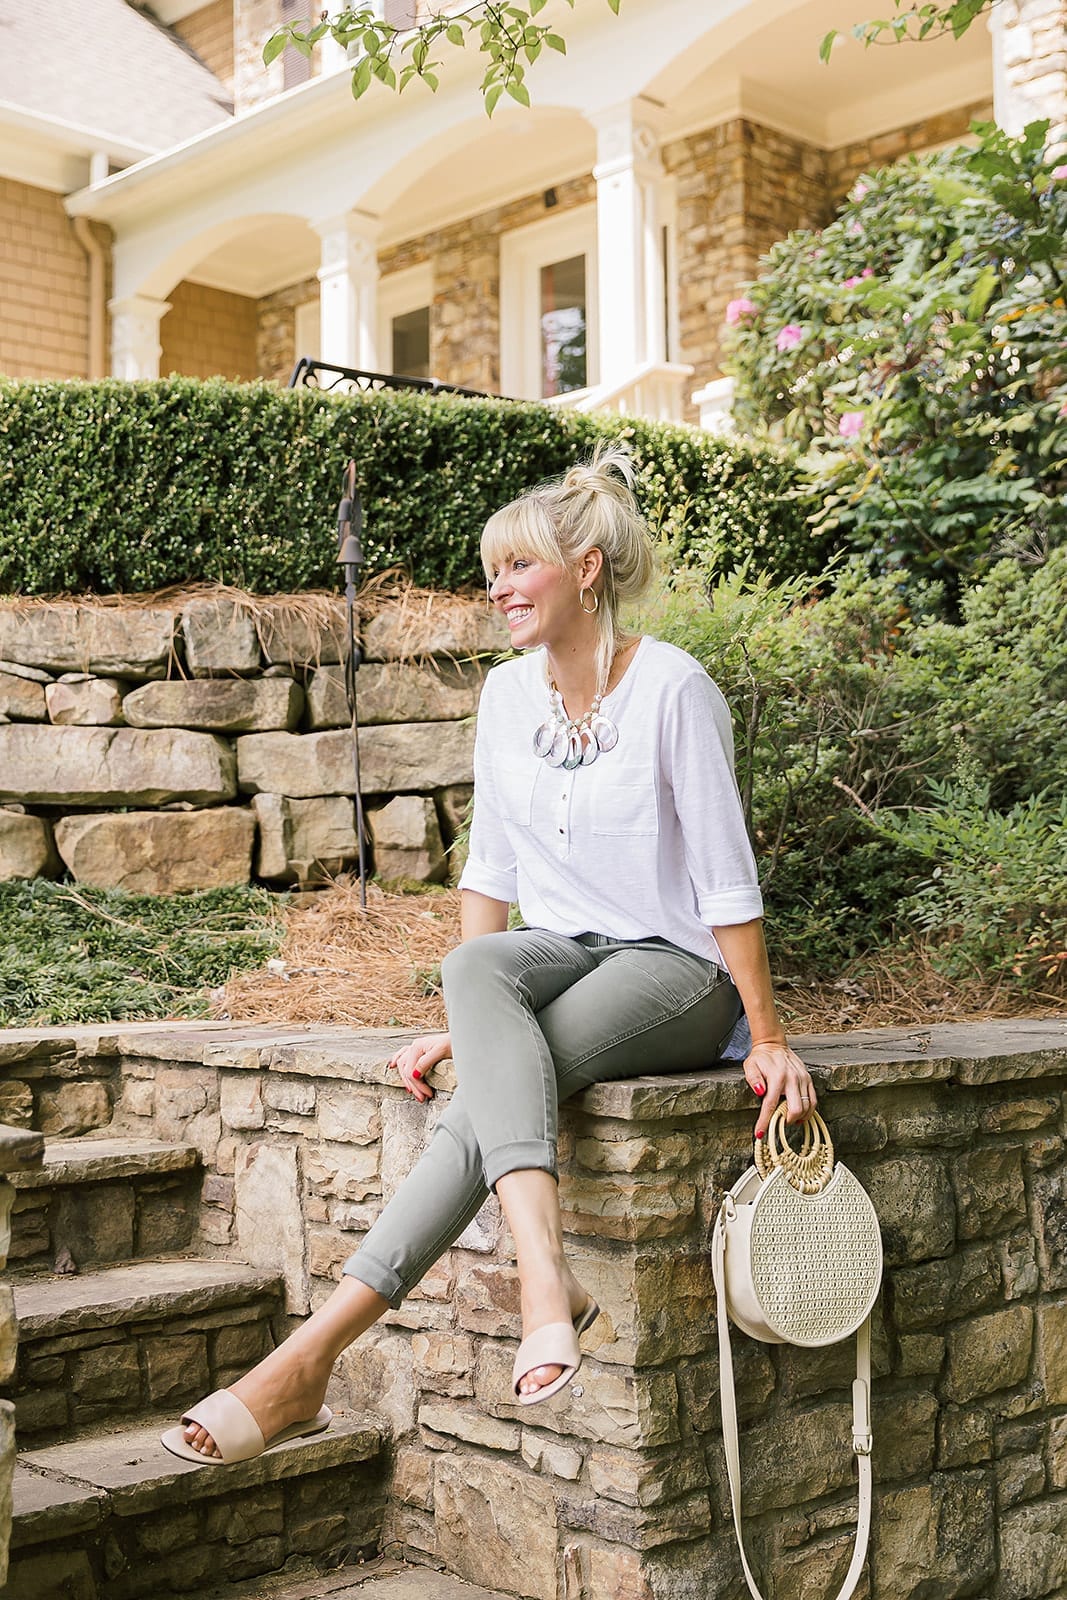 Attention Ladies: The perfect Summer Outfit! On Sale, too! | BlueGrayGal